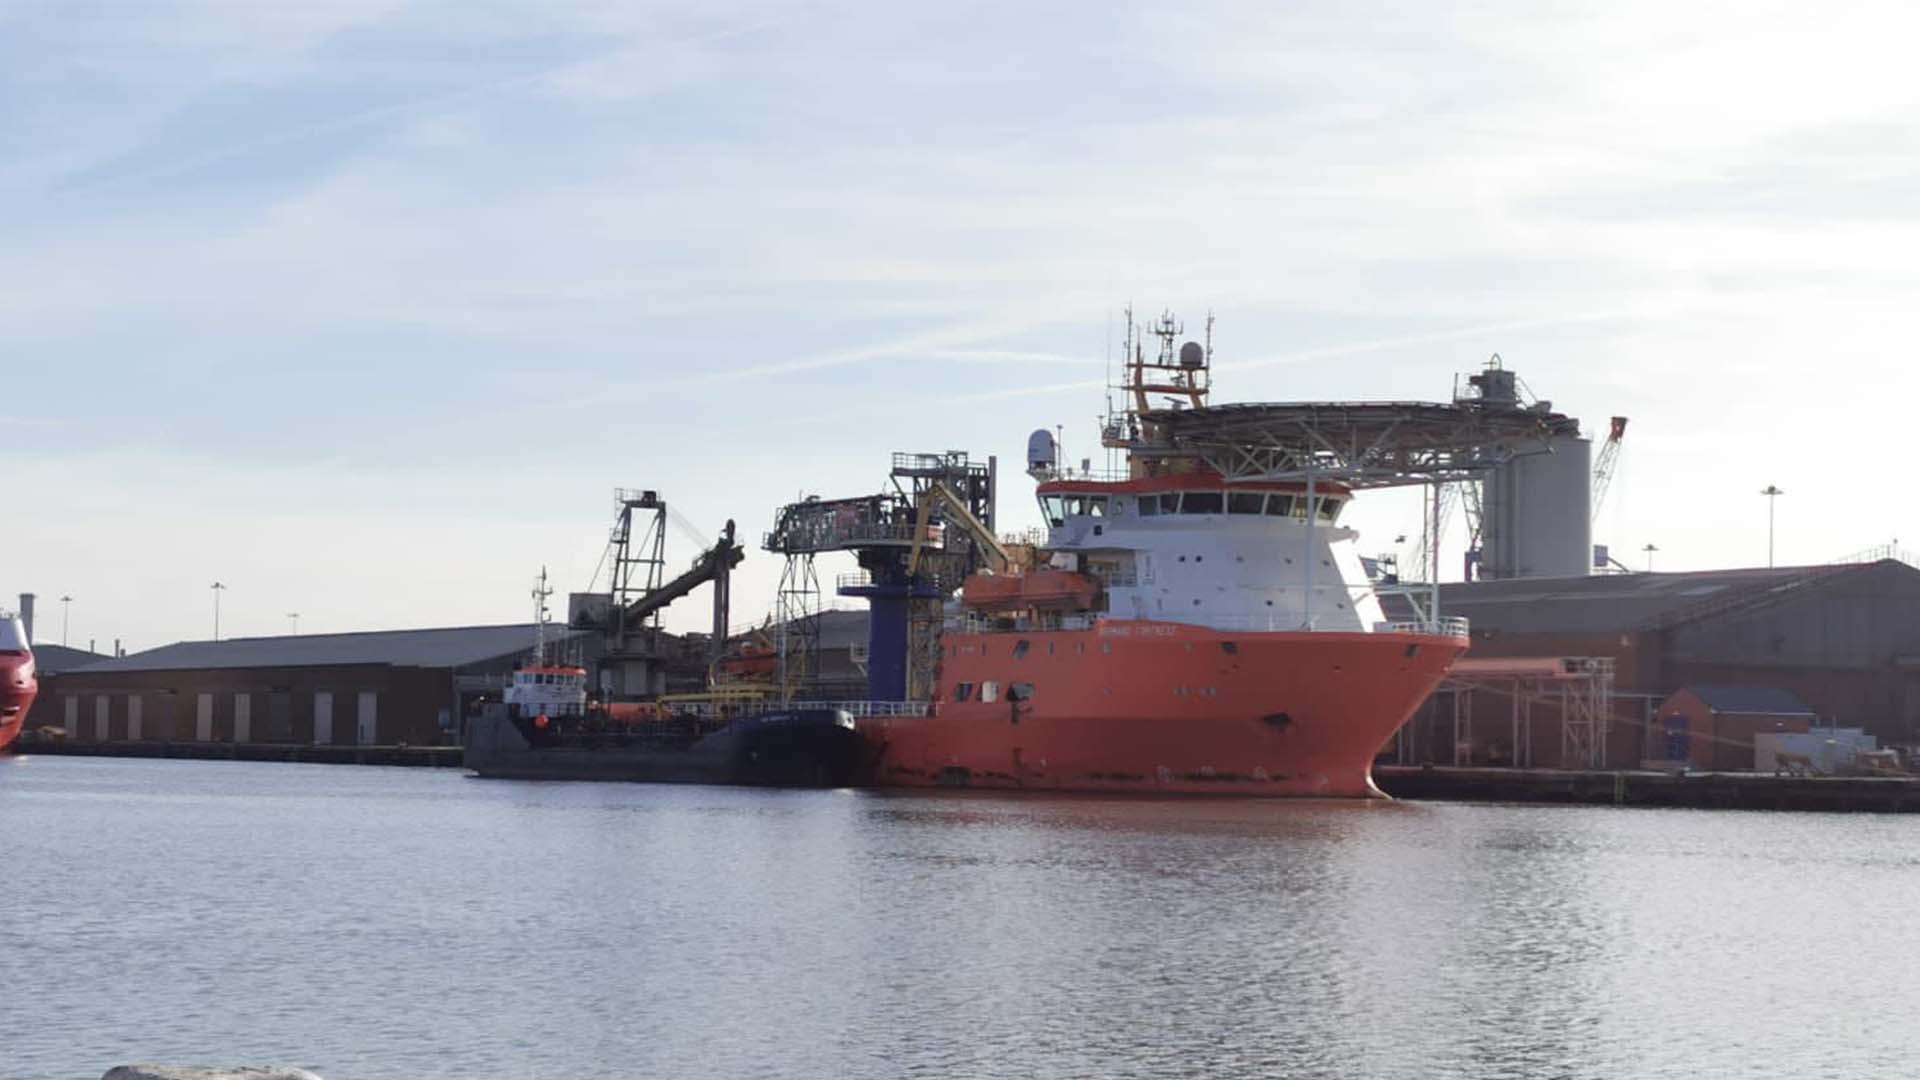 Rix Merlin performing the bunkering the receiver ship Normand Fortress an Service Offshore Vessel.